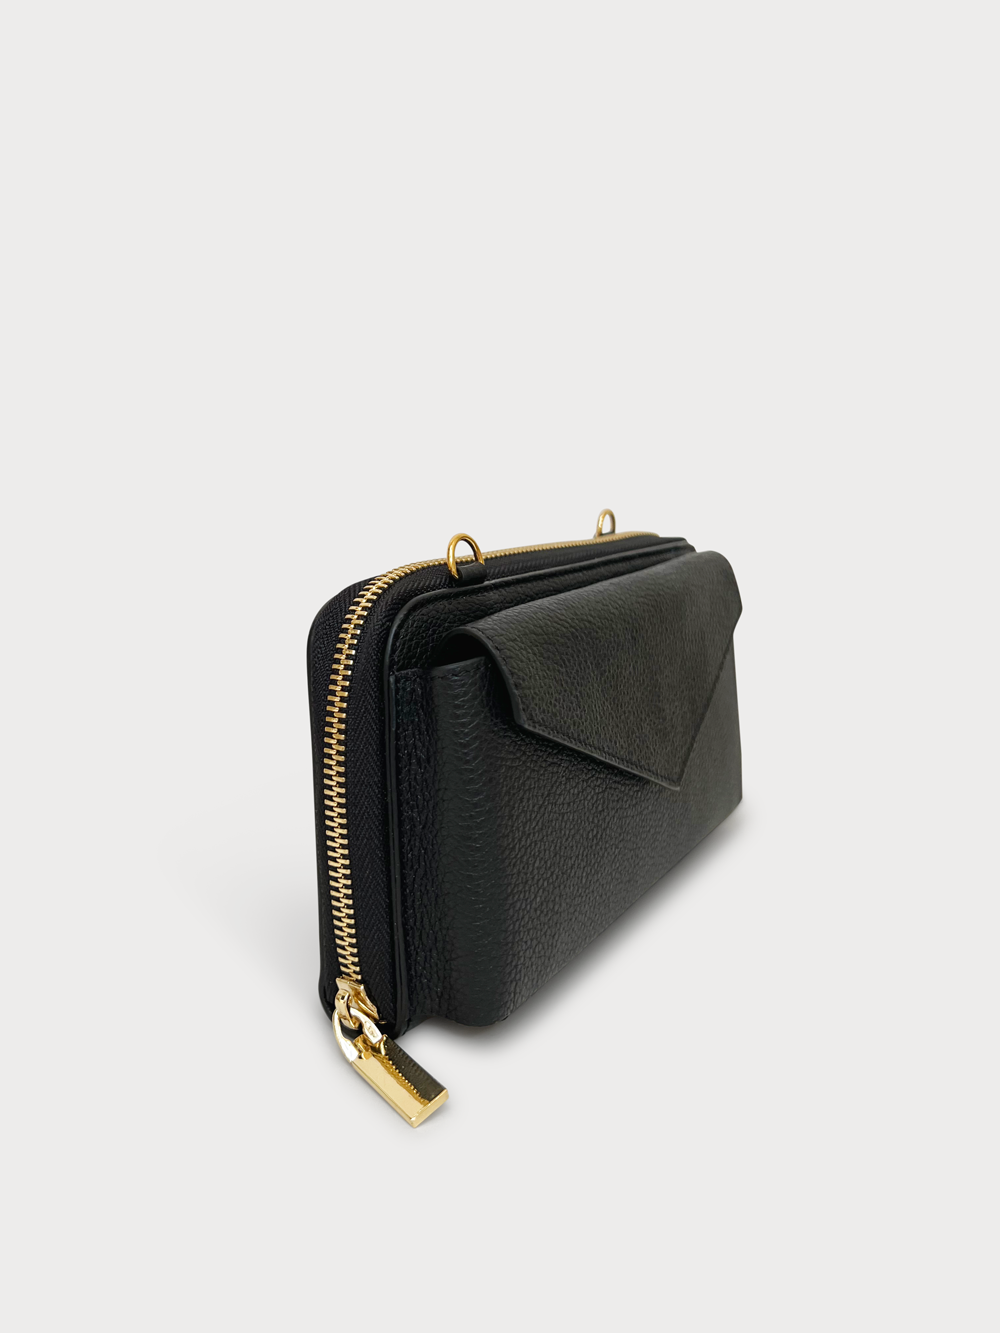 Mel Boteri | 'Himani' Wallet Clutch Bag With Detachable Cross-Body Strap | nero leather | side view